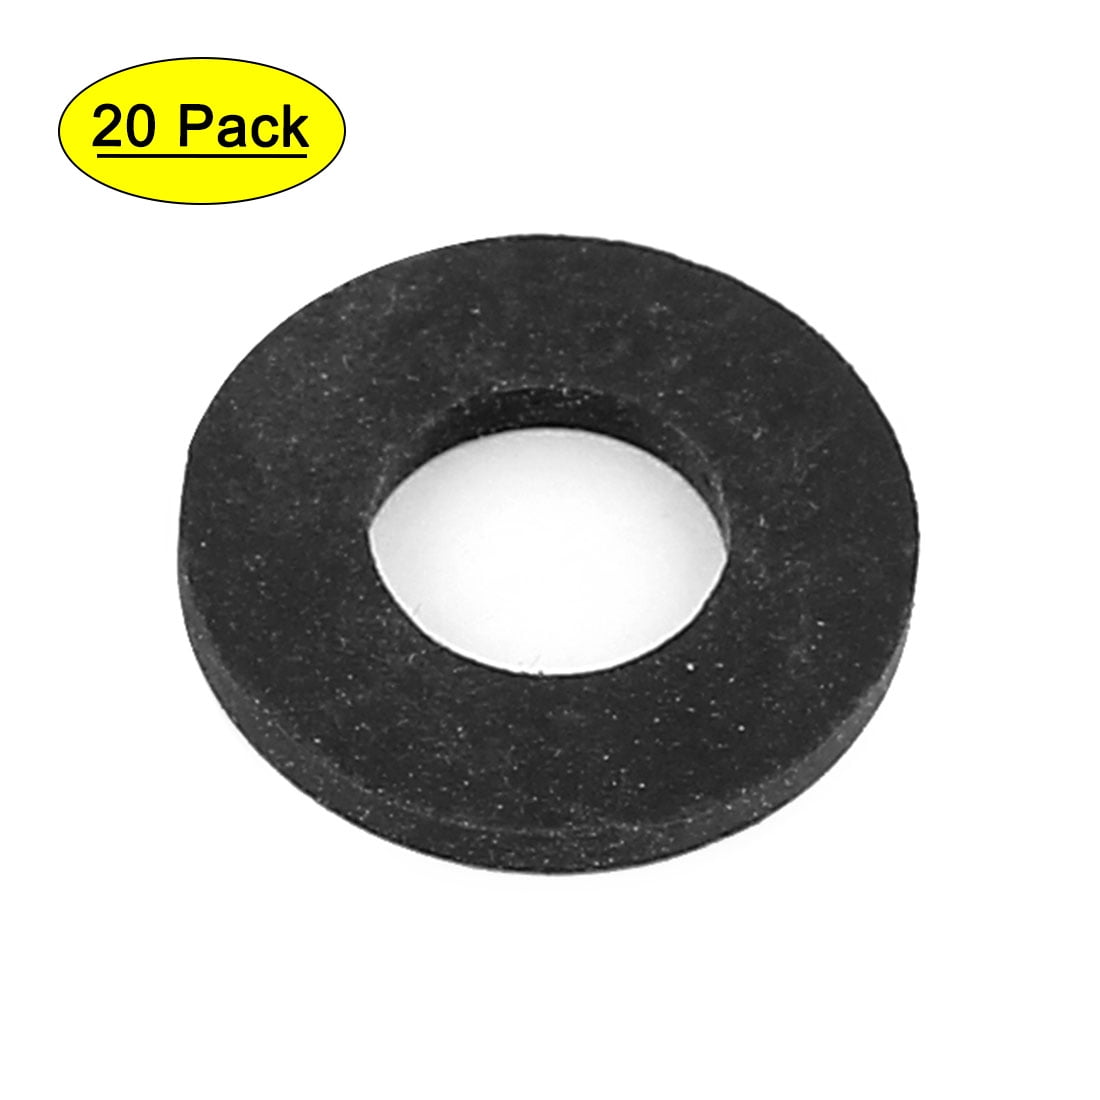 100Pcs Round Washers O-Ring Seals Flat Gaskets for Water-tap Pipe Shower Hose 